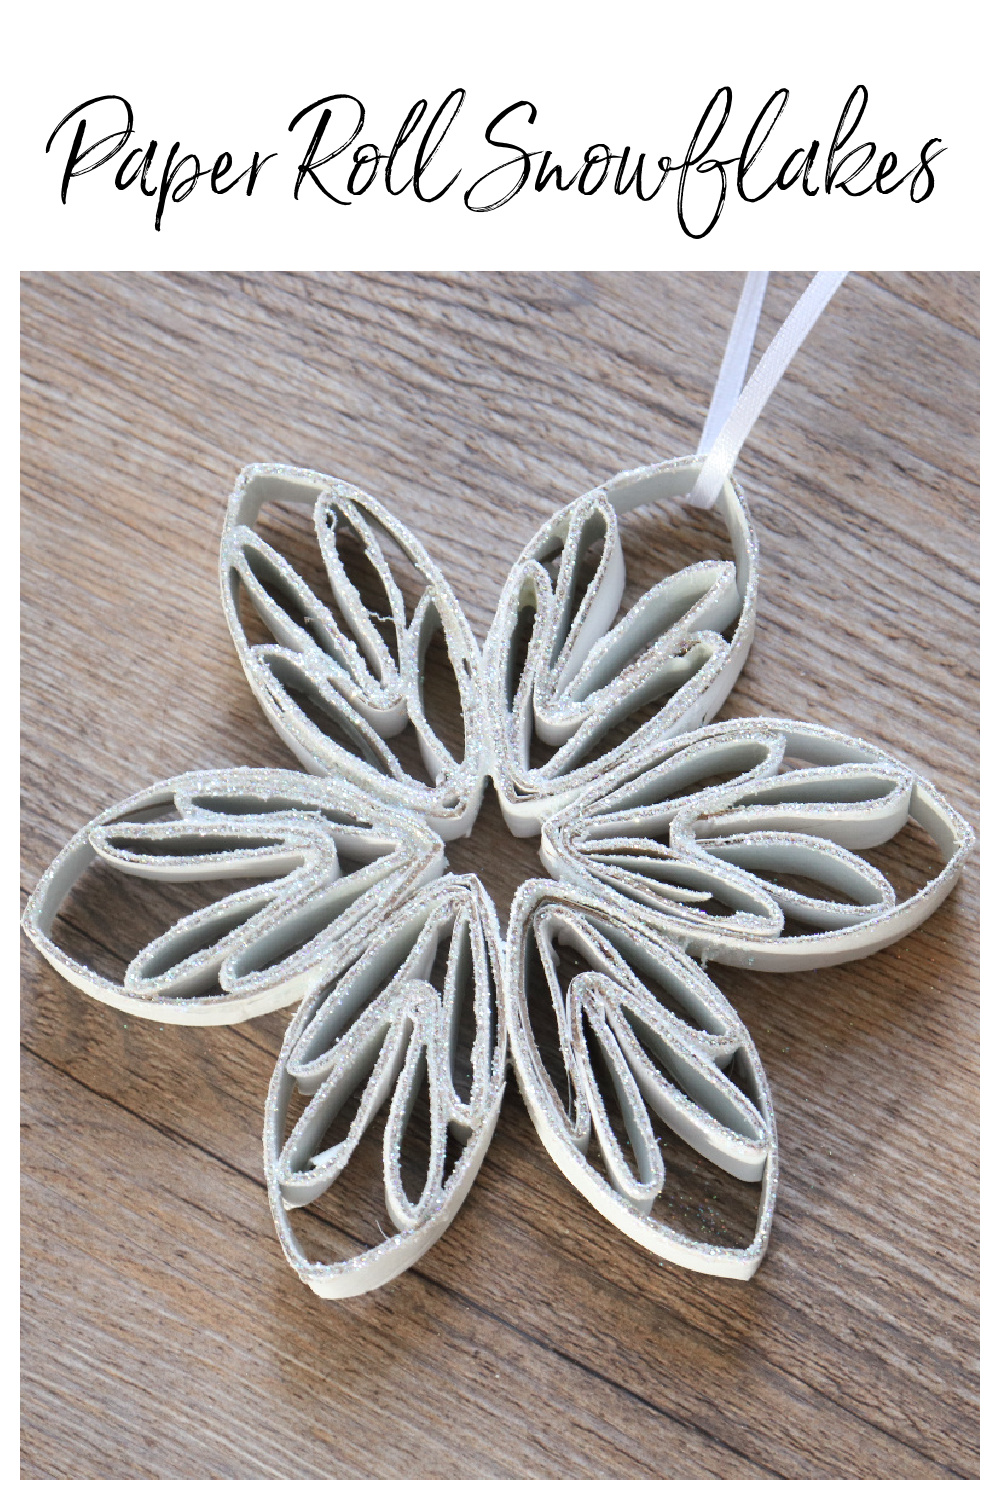 Learn to create DIY Paper Roll Snowflakes using Tombow adhesives with this step-by-step tutorial from Amy Latta.